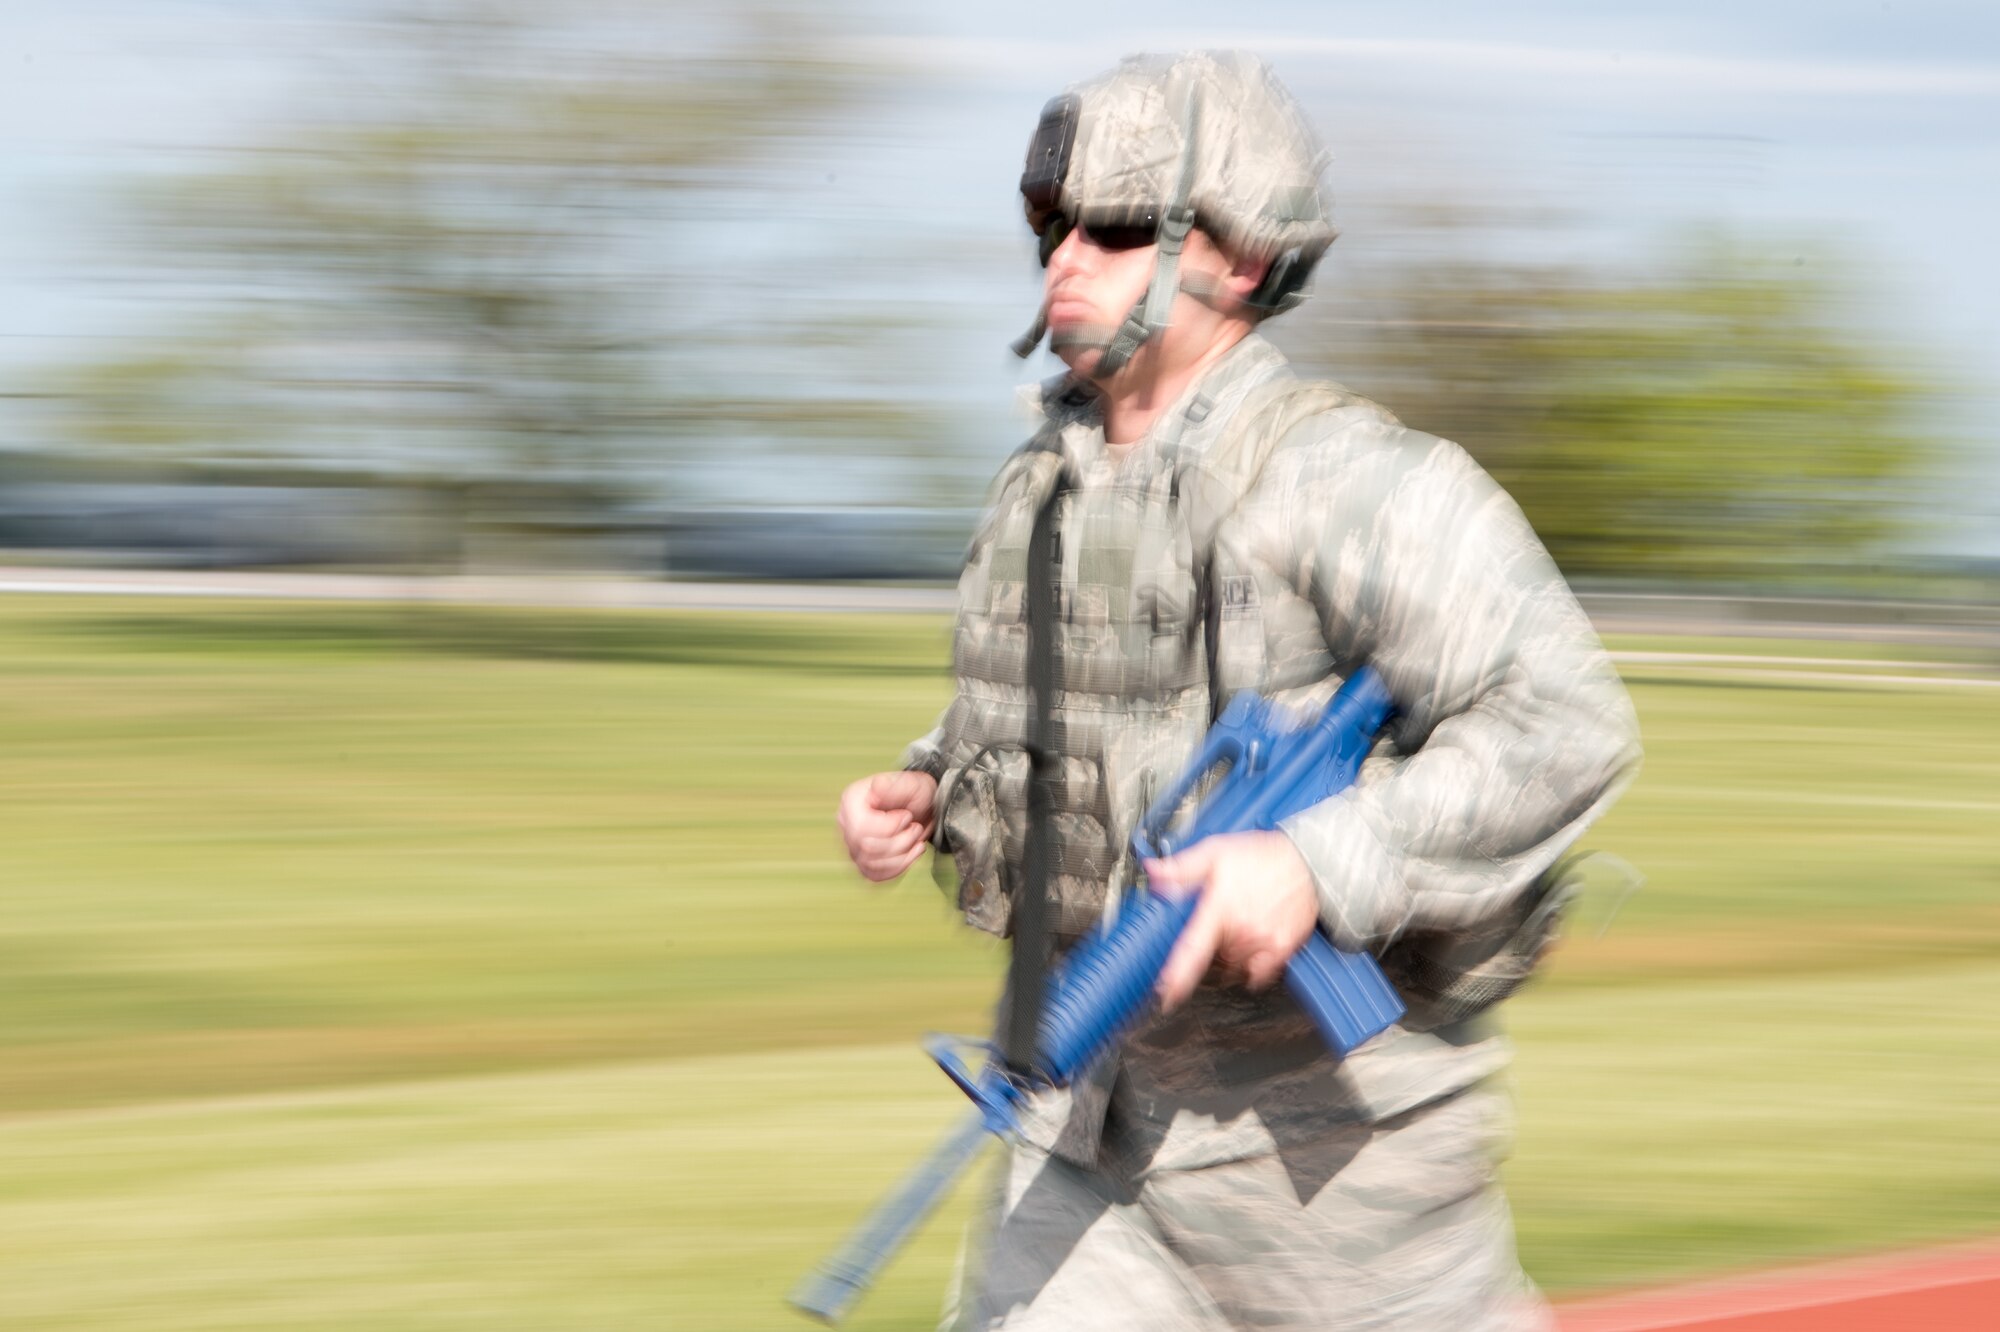 Capt. James Scott, 436th Security Forces Squadron operations officer, runs in full body armor with a training rifle during the 2020 Police Week Ruck March May 14, 2020, at Dover Air Force Base, Delaware. Participants signed up to walk or run for a 30-minute time slot, but some participants went far beyond that, traveling distances of up to 20 miles. (U.S. Air Force photo by Mauricio Campino)